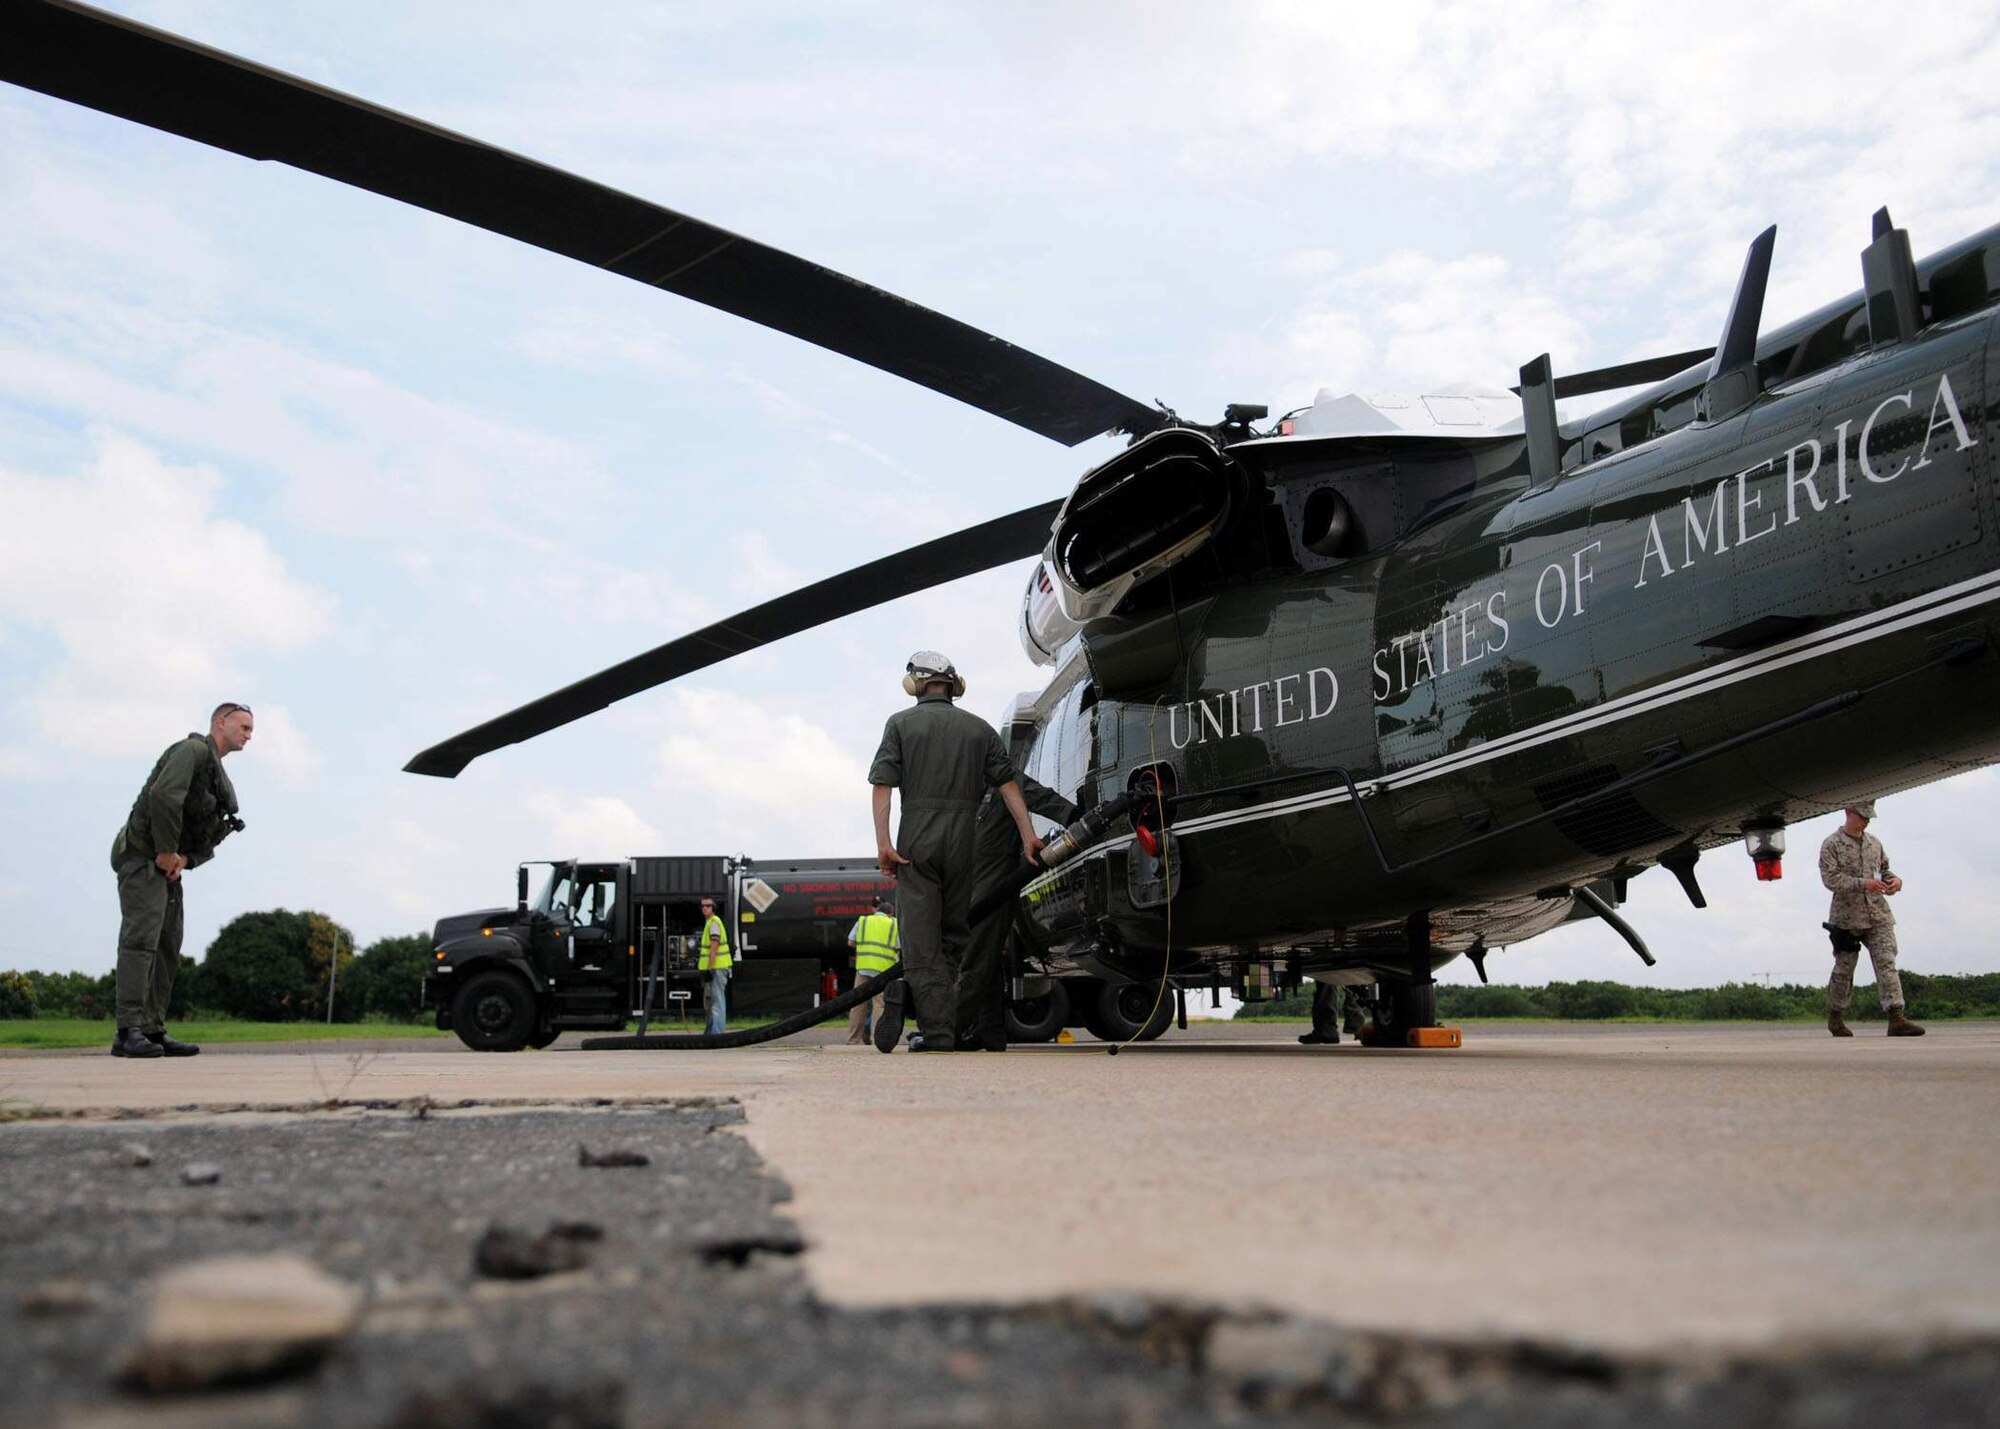 Members of the 435th Logistics Readiness Squadron assist with refueling Marine One at Kotoka International Airport July 6 at Accra, Ghana. The Airmen are among more than 150 Airmen, Sailors and Marines in Ghana and Sailors aboard the USS Iwo Jima who came together to form a task force to support President Obama's visit July 10 and 11. Members of the 435 LRS are a petroleum, oils and lubricants team from Ramstein Air Base, Germany. (U.S. Air Force photo/Staff Sgt. Jerry Fleshman) 